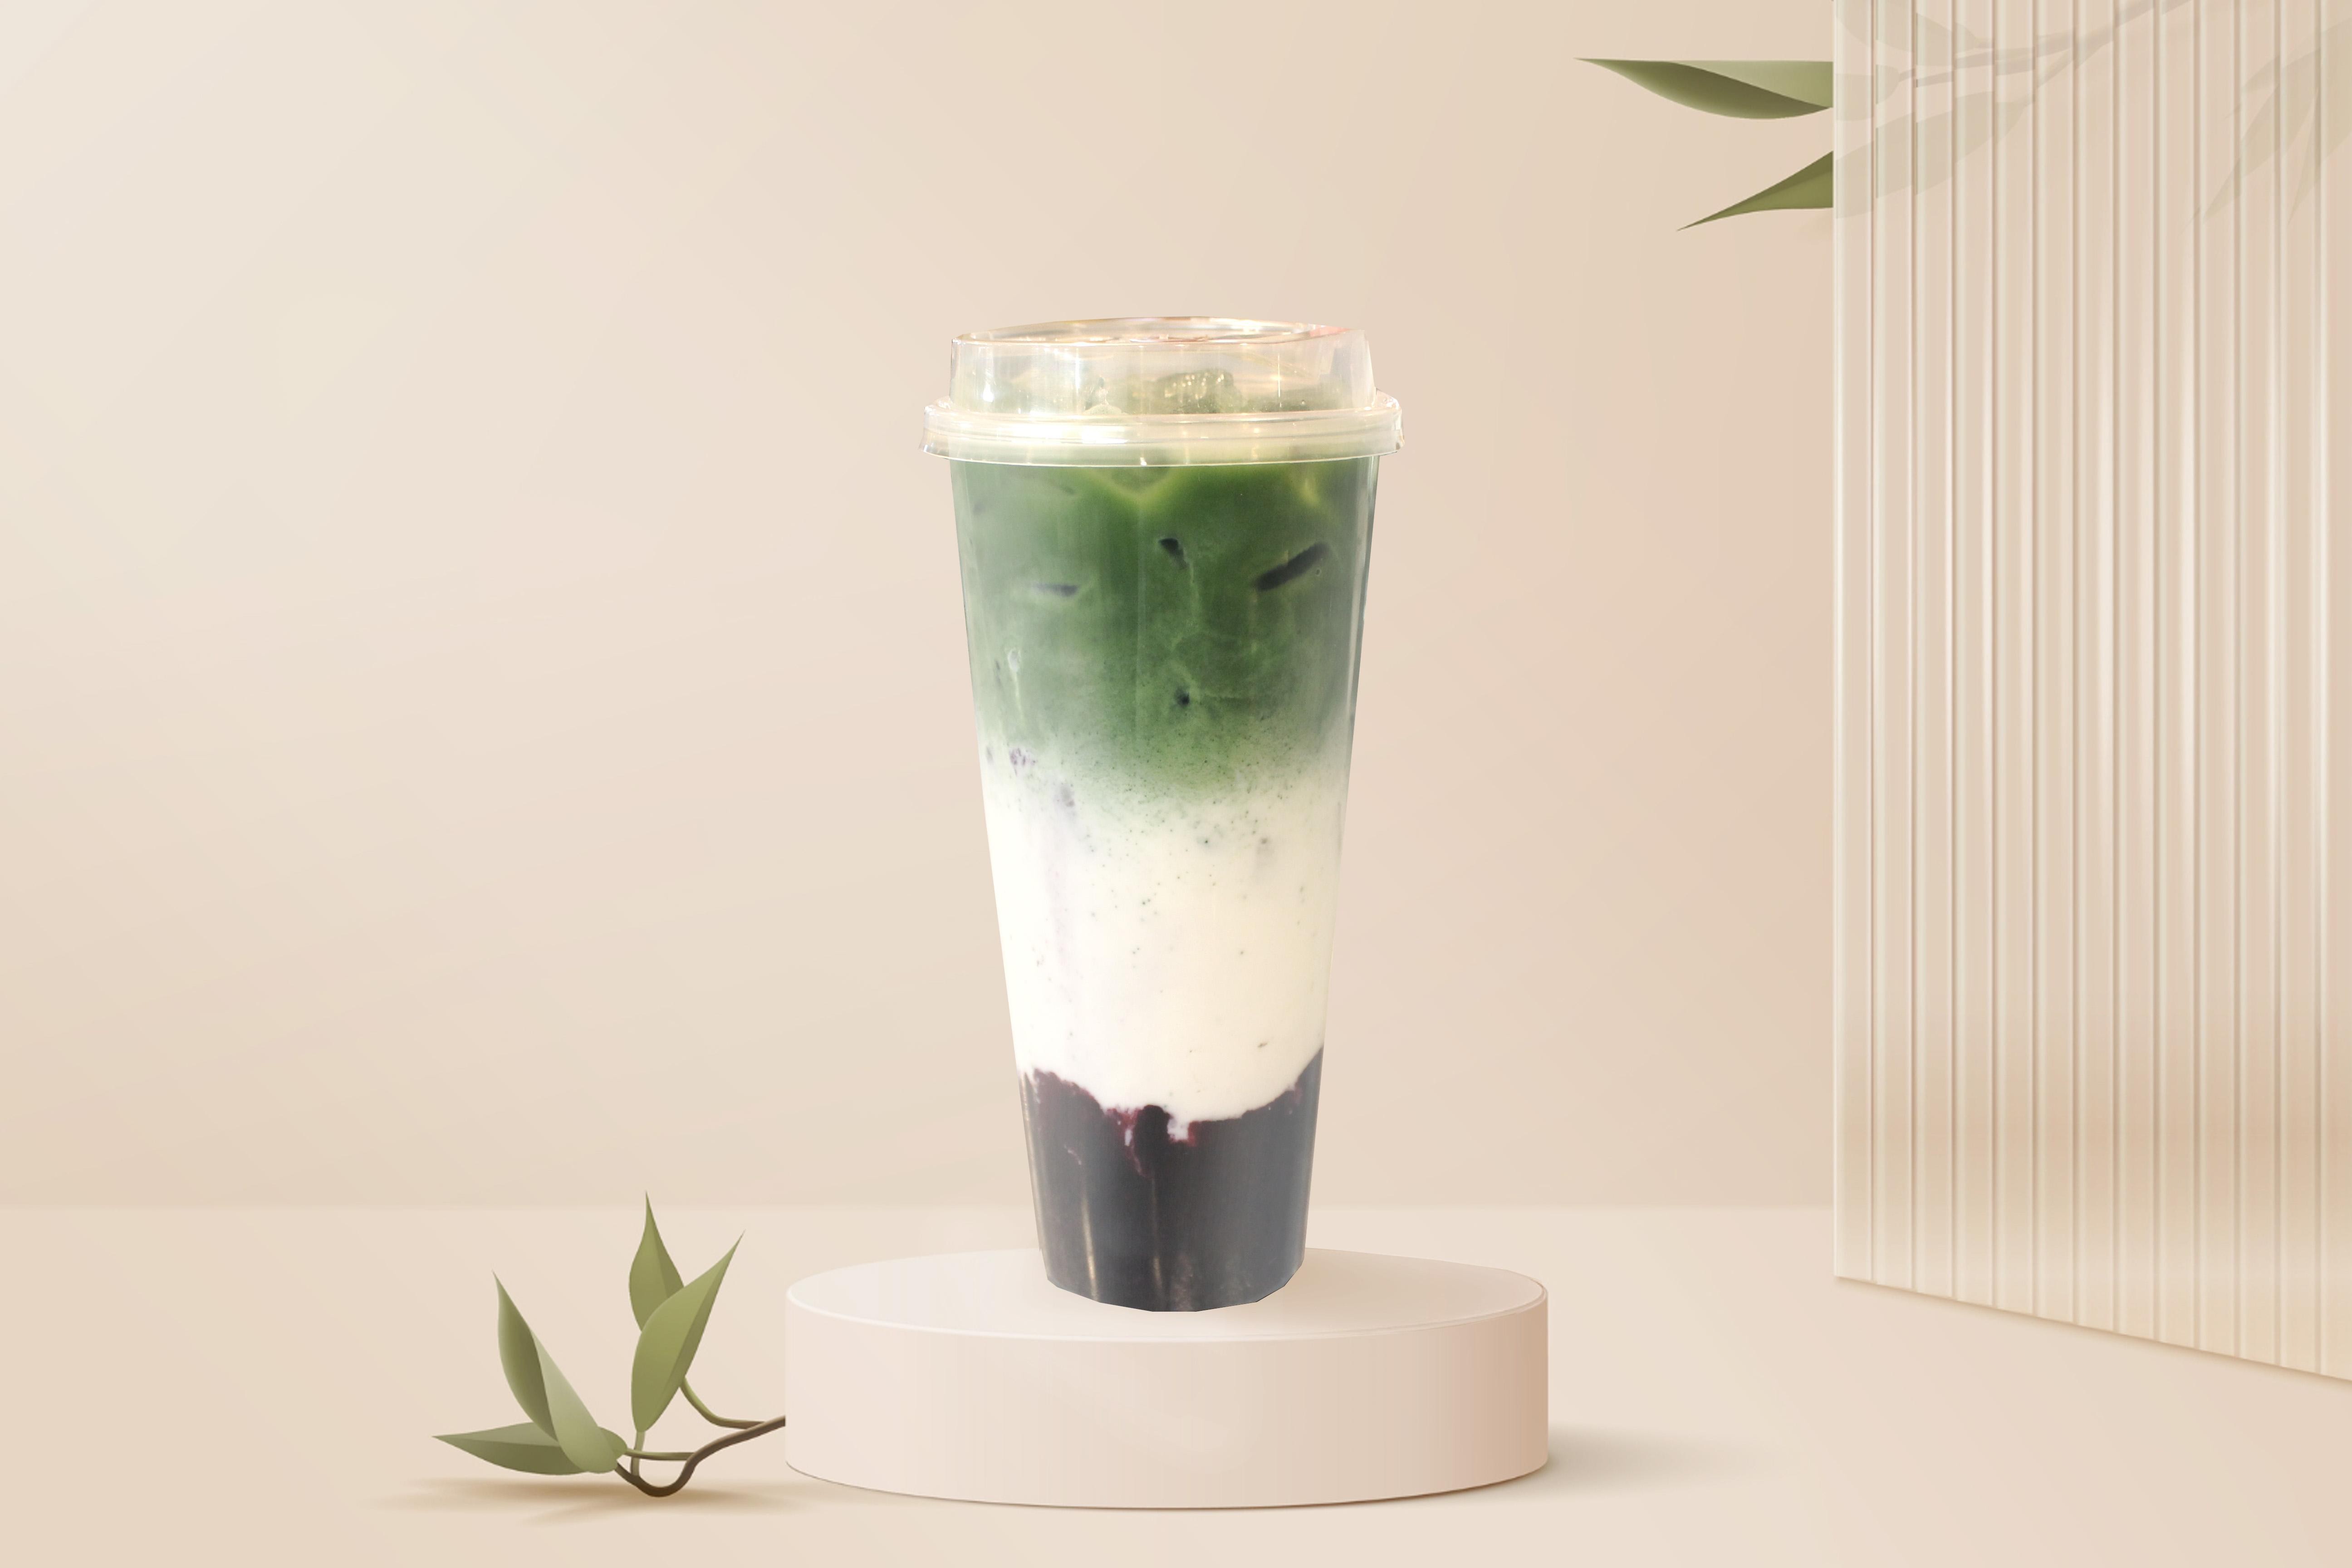 Matcha Iced Latte with Blueberry Sauce